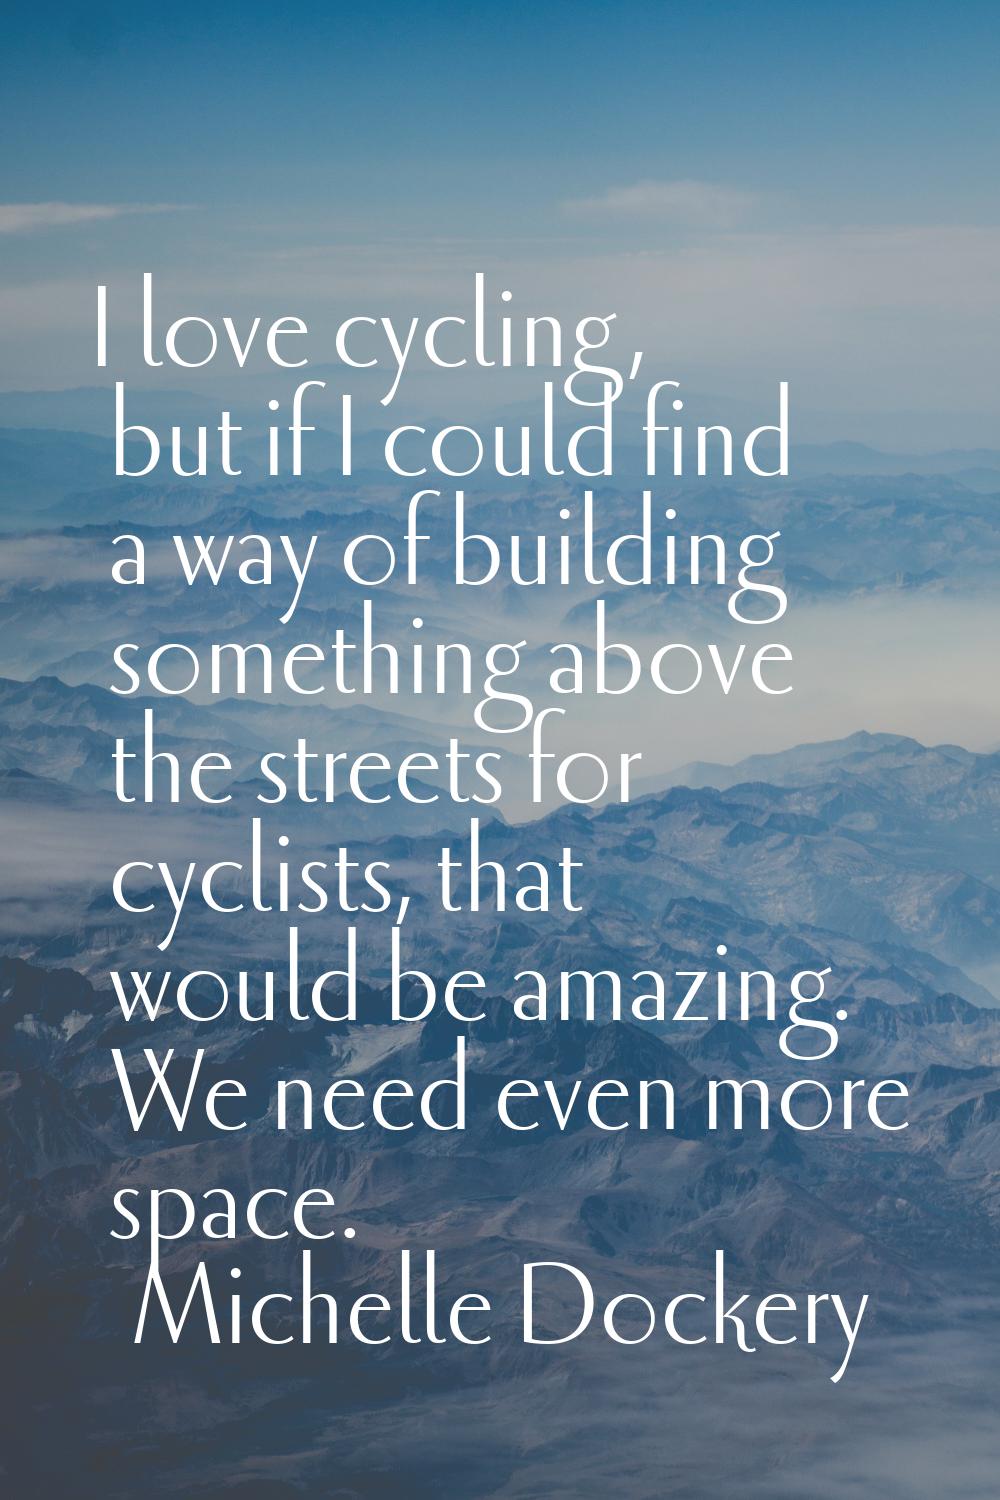 I love cycling, but if I could find a way of building something above the streets for cyclists, tha